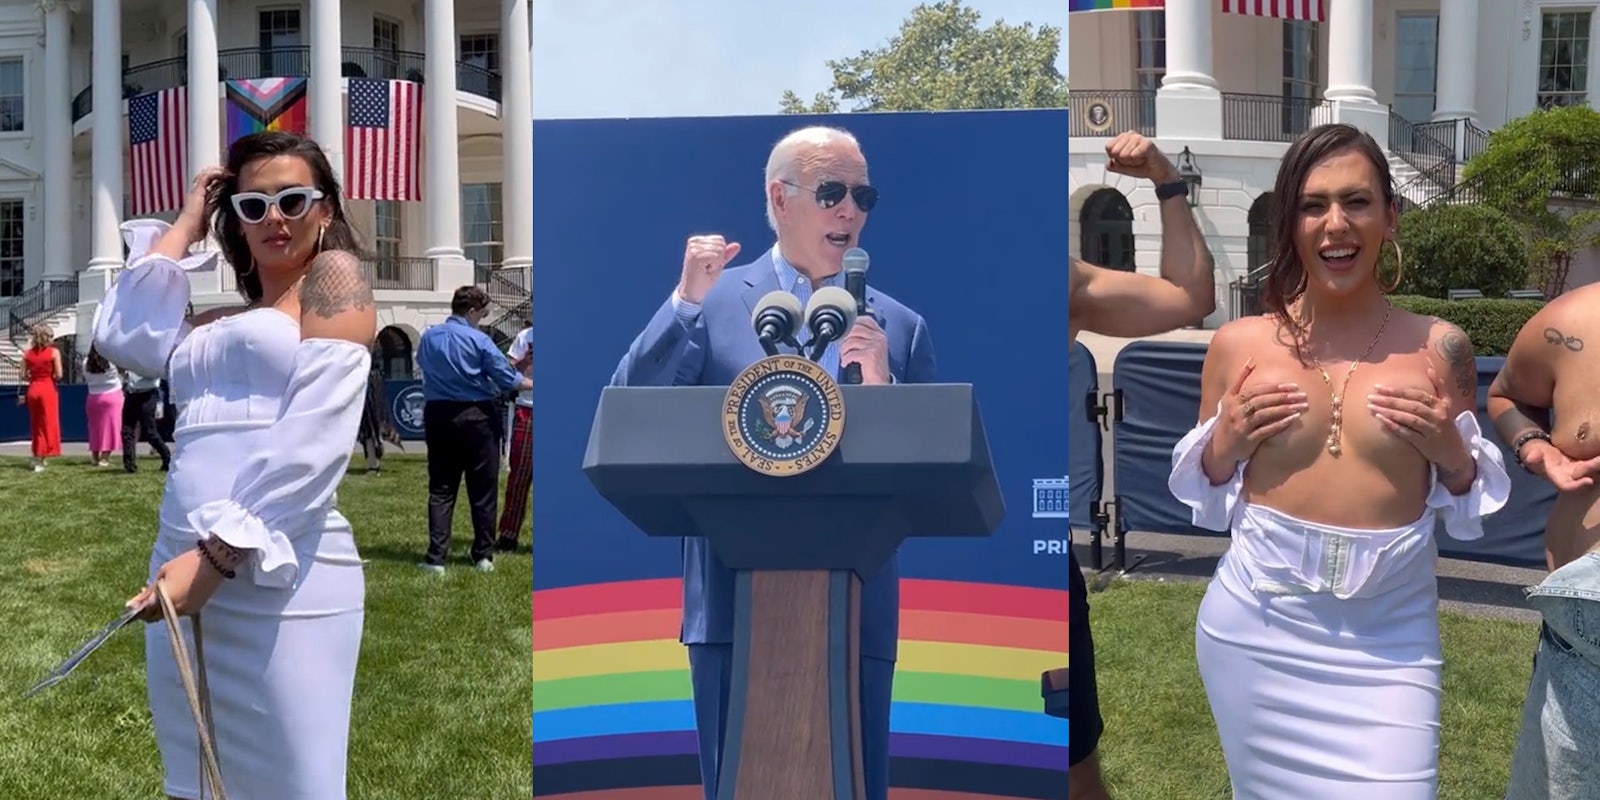 Rose Montoya at The White House (l) Joe Biden speaking at podium on stage with microphone and rainbow background (c) Rose Montoya topless at The White House